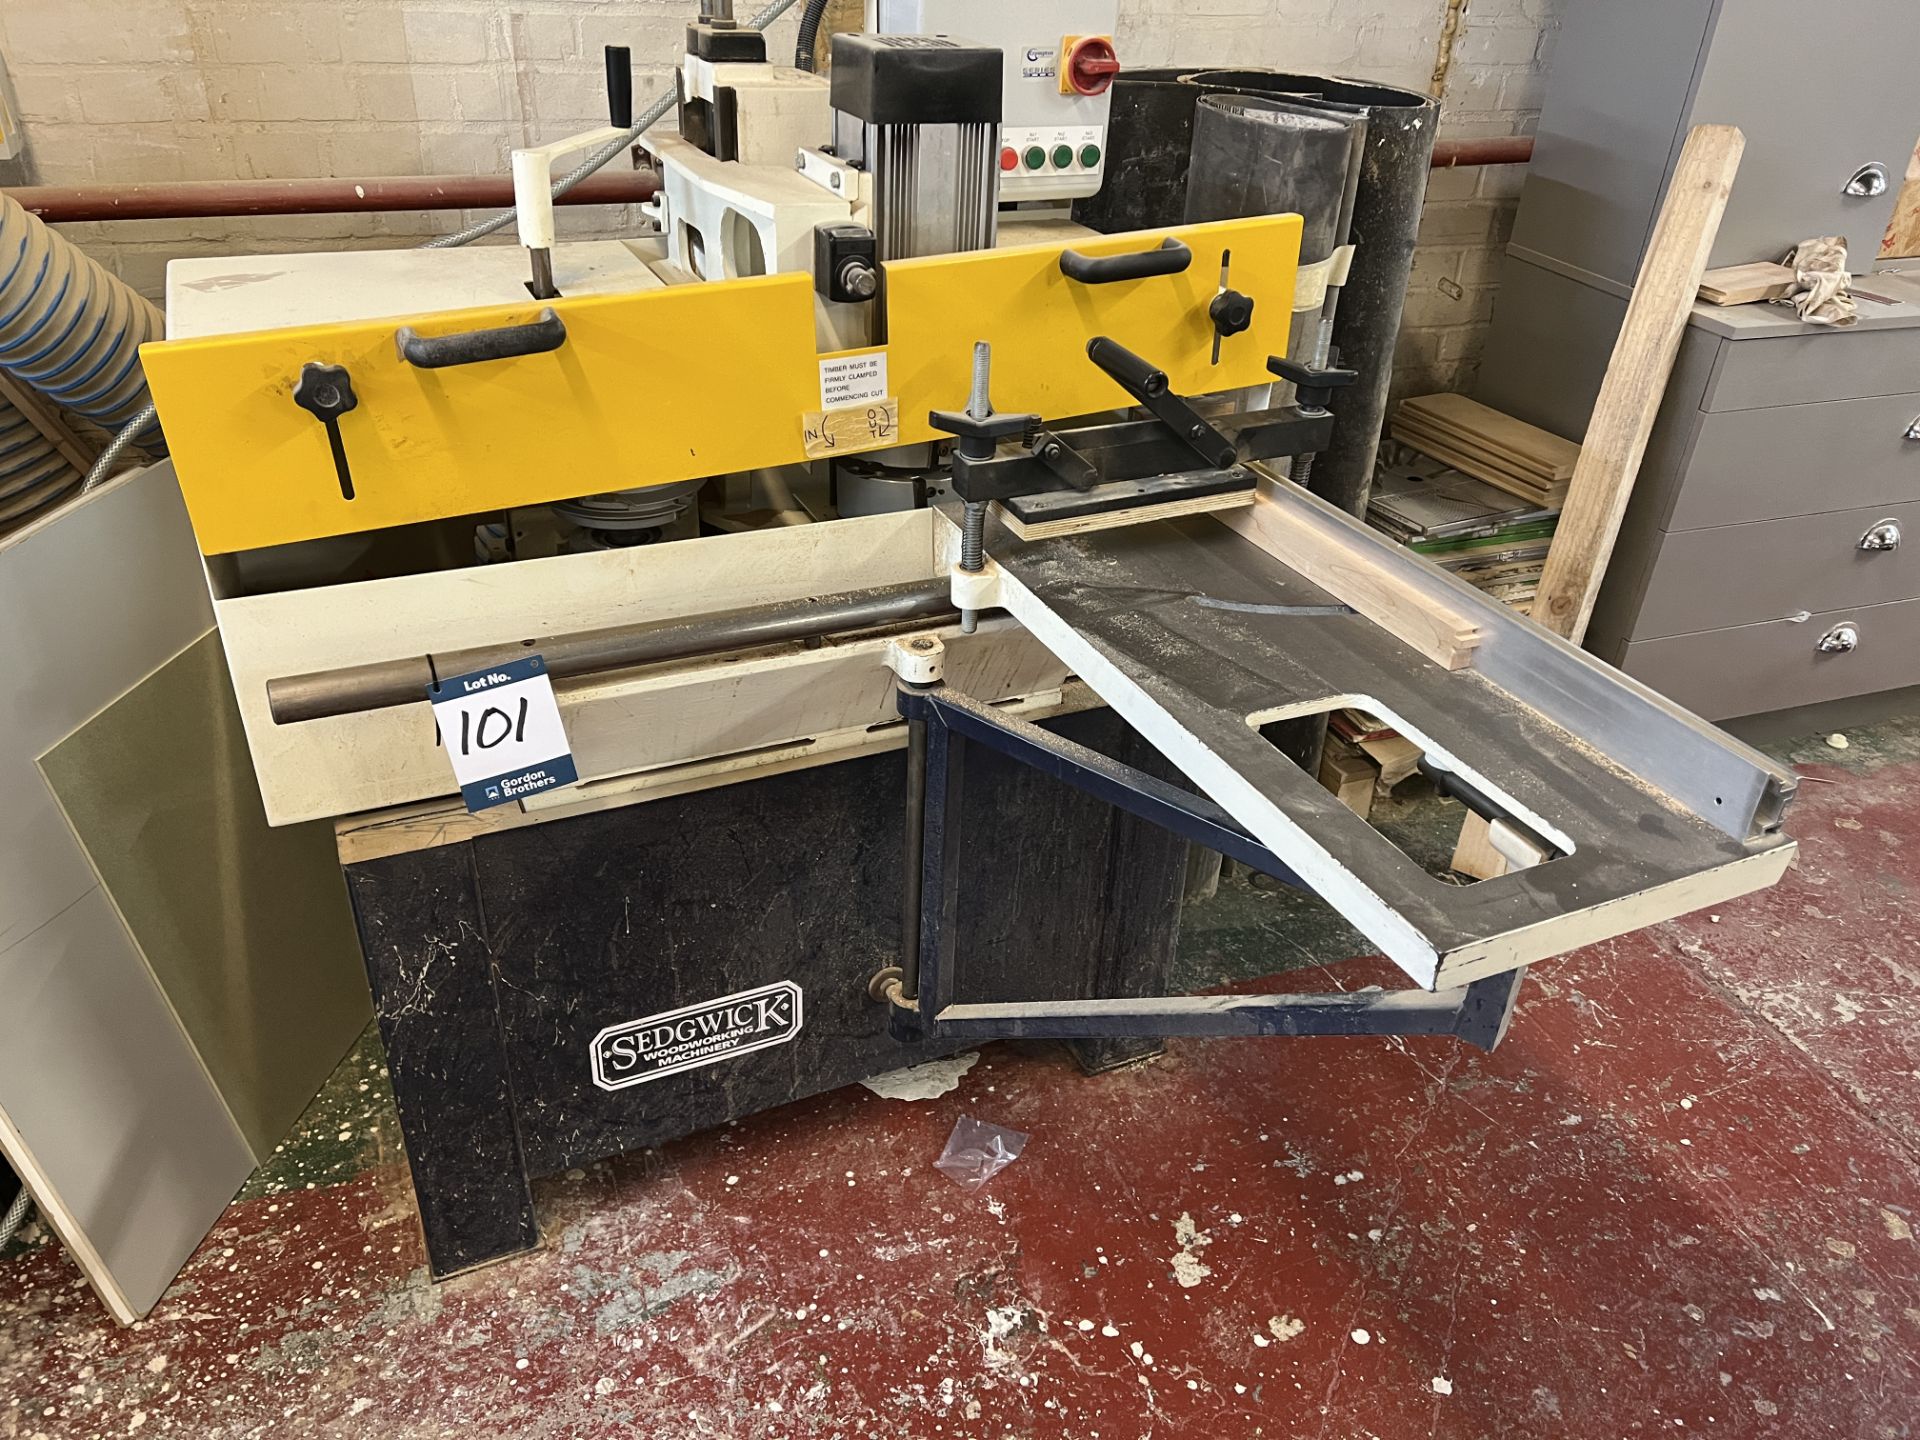 Sedgwick multi-head tenoner, 800mm x 300mm work table, 400 volts with Cromton series 3000 control